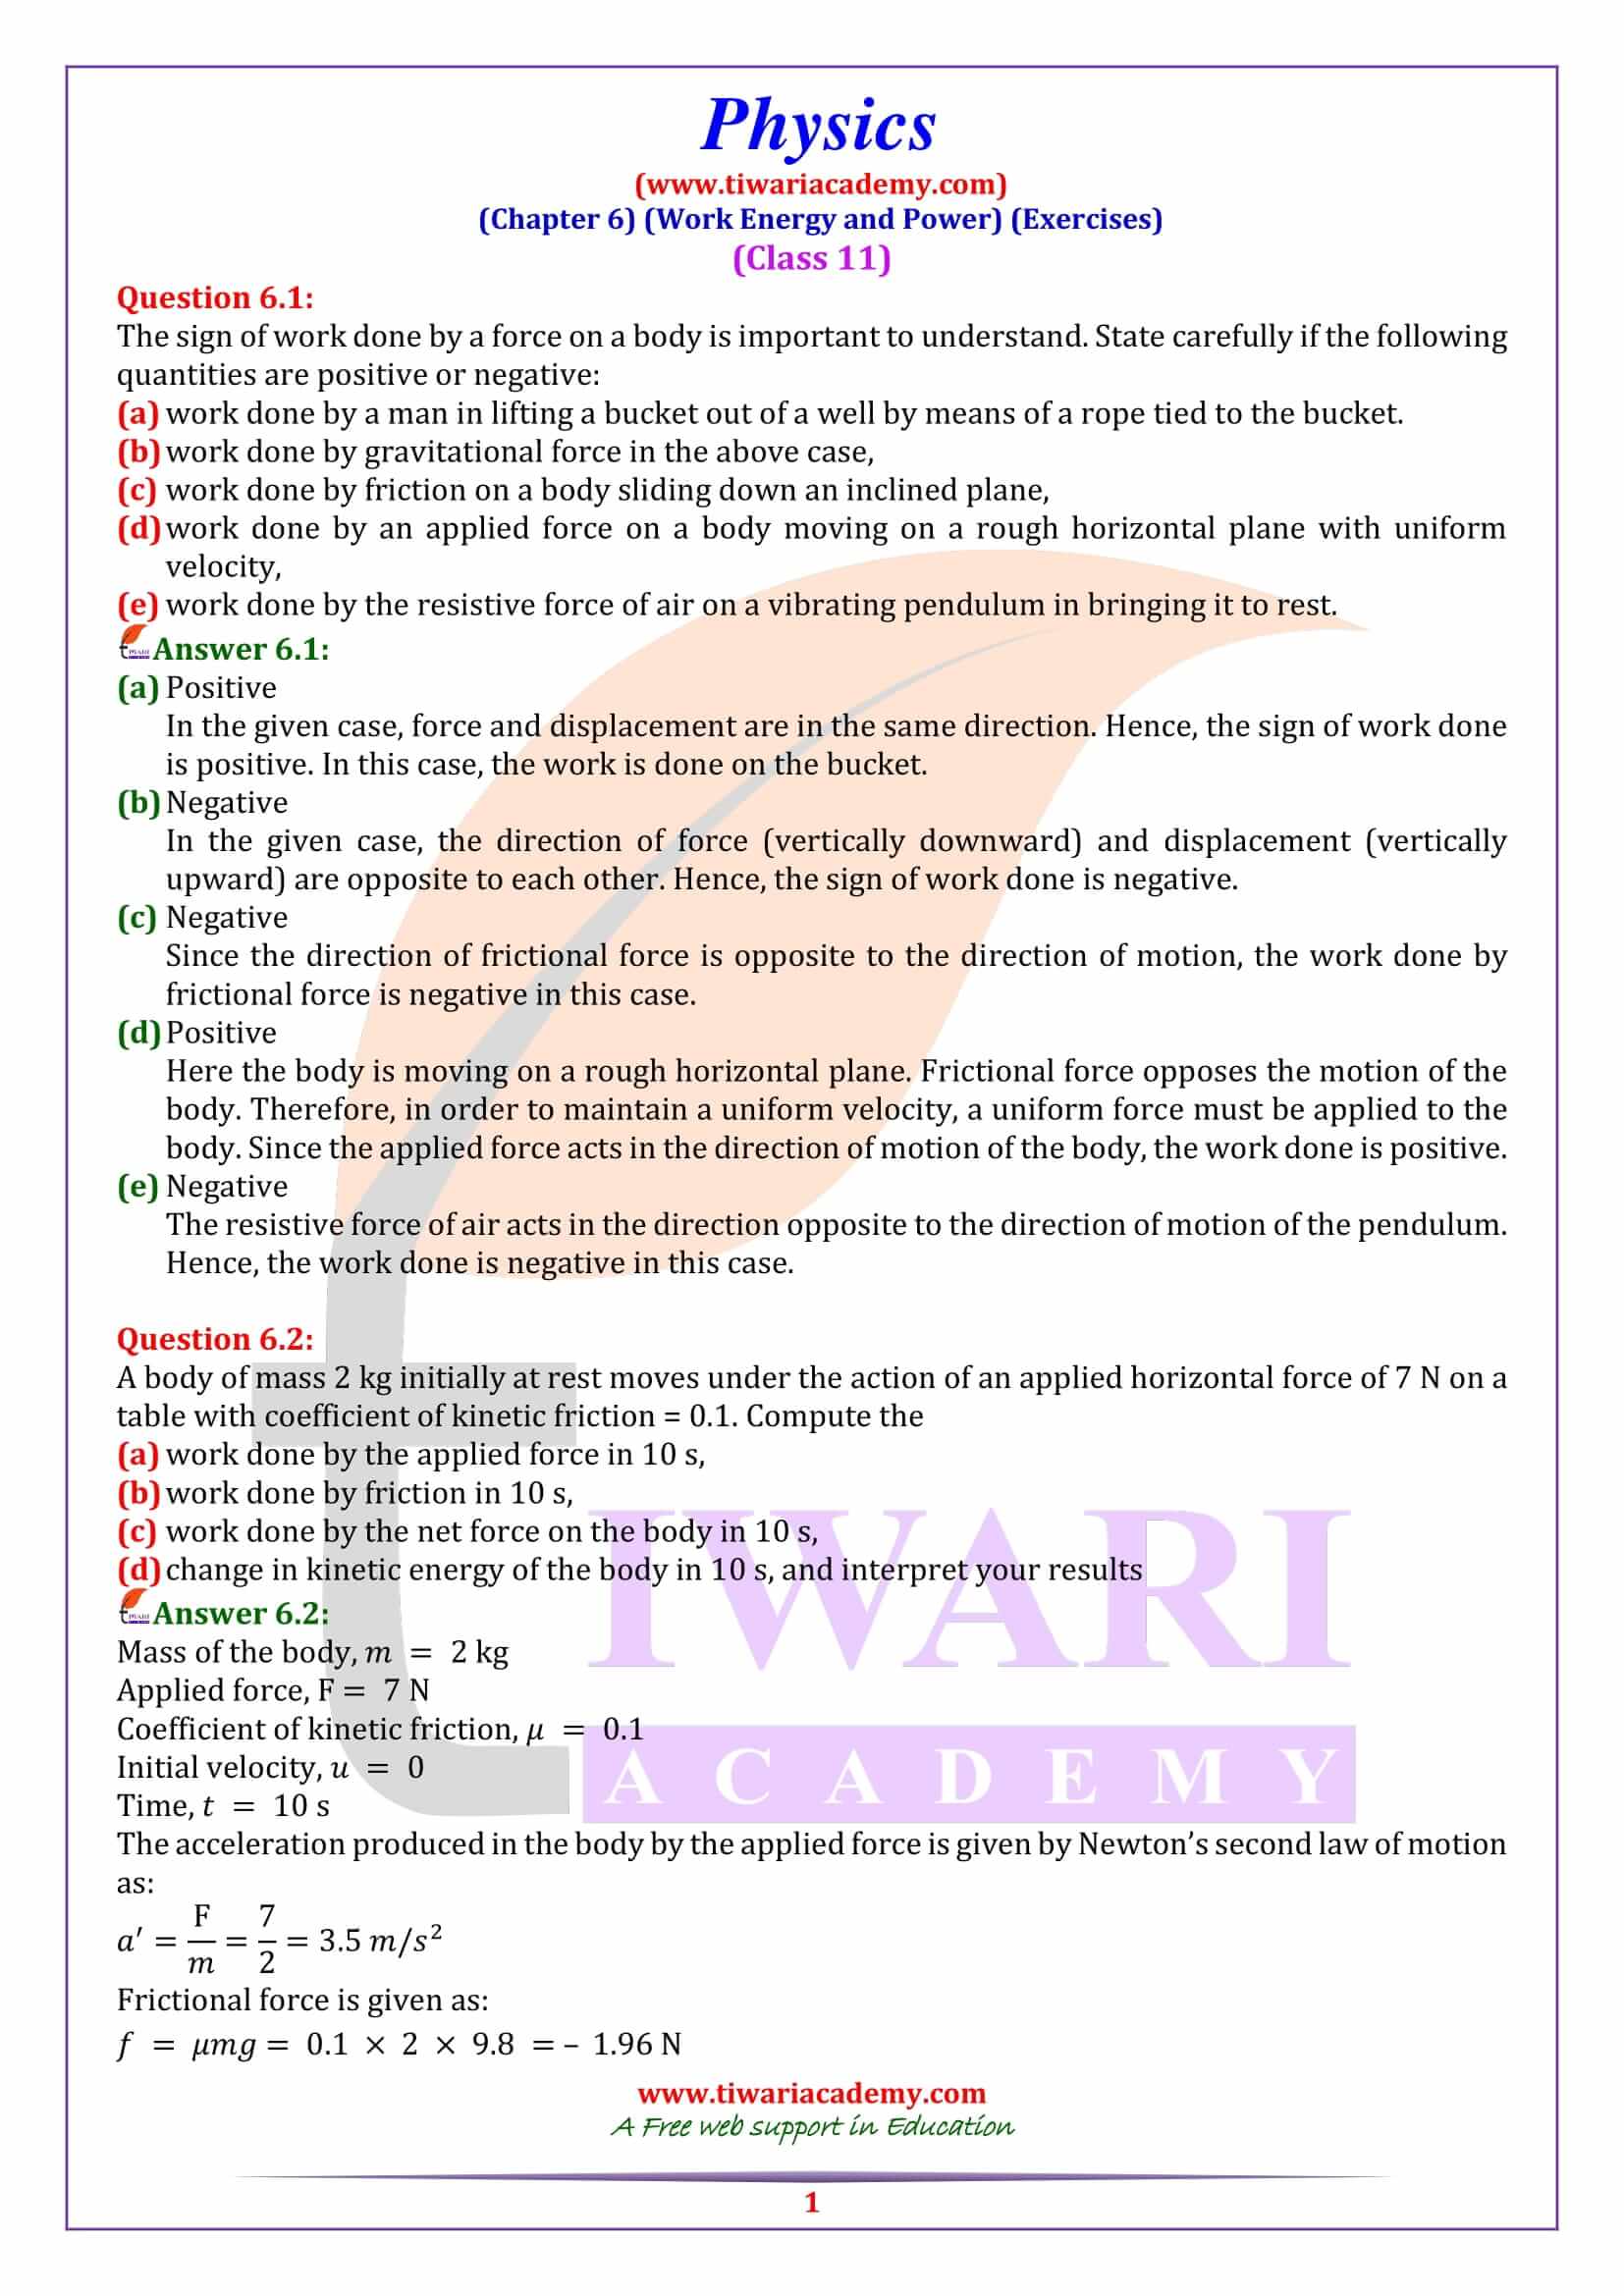 NCERT Solutions for Class 11 Physics Chapter 6 exercises